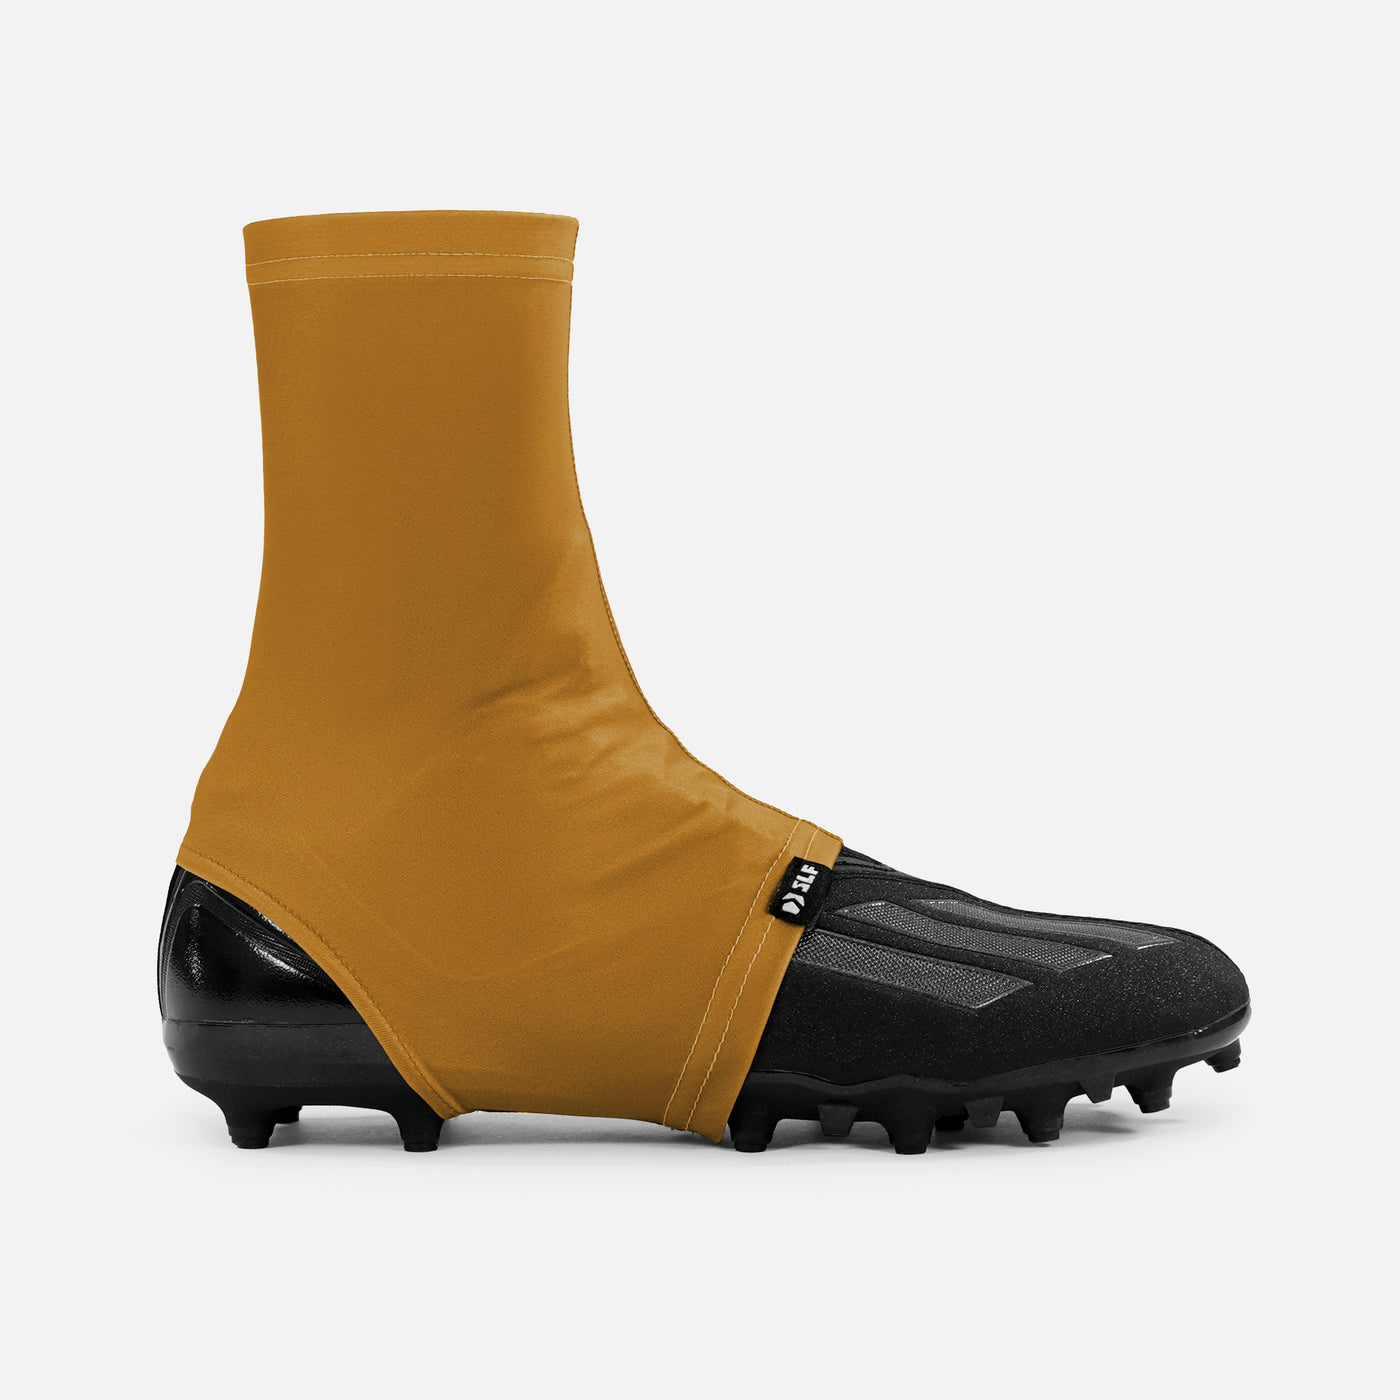 Hue Gold Spats / Cleat Covers - Big